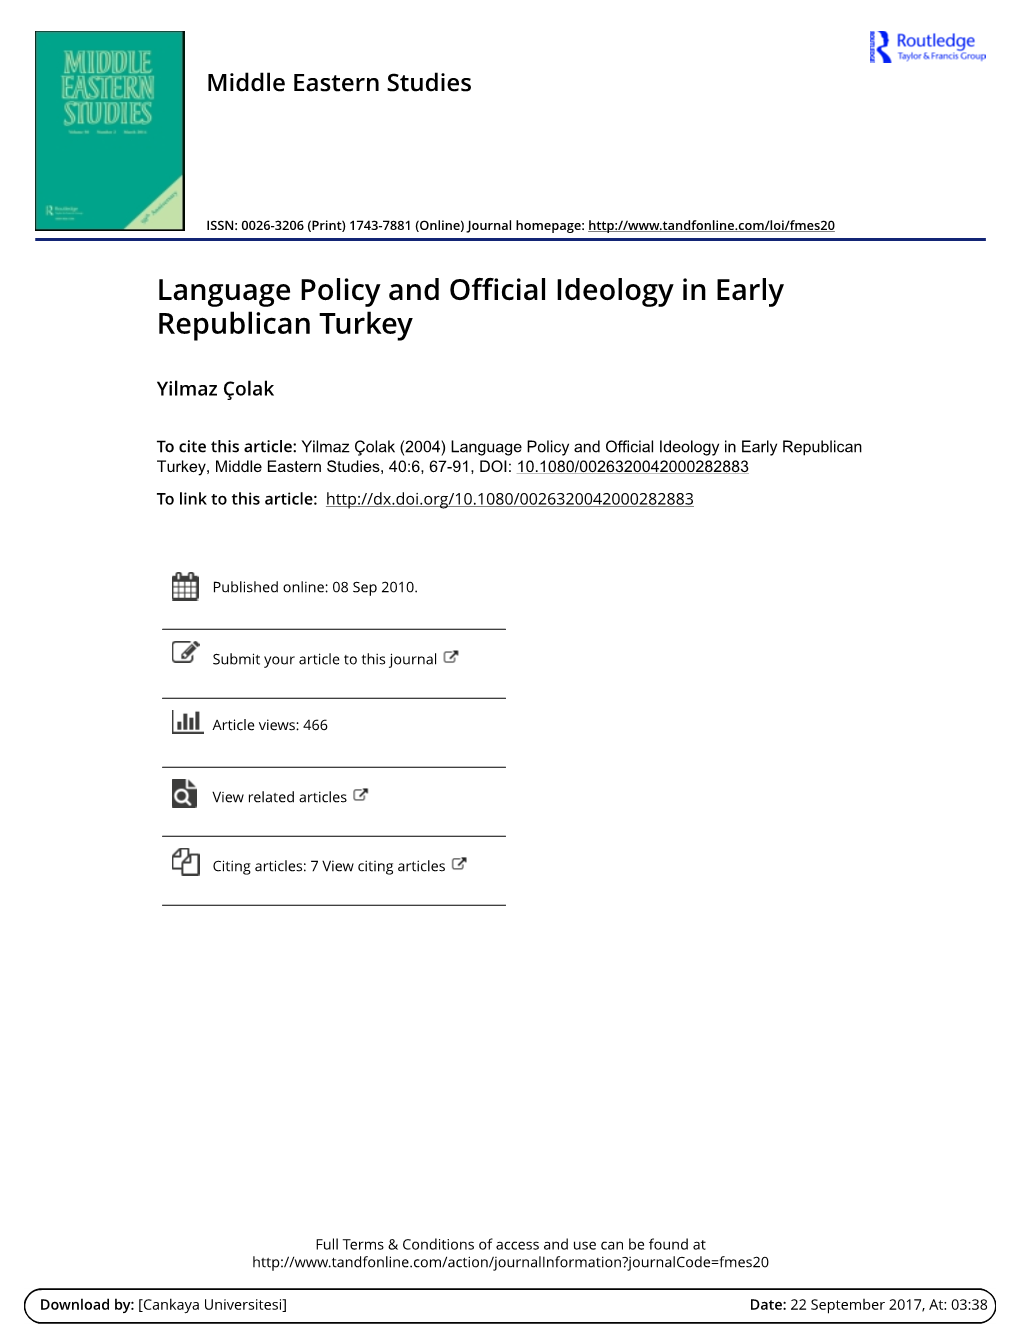 Language Policy and Official Ideology in Early Republican Turkey